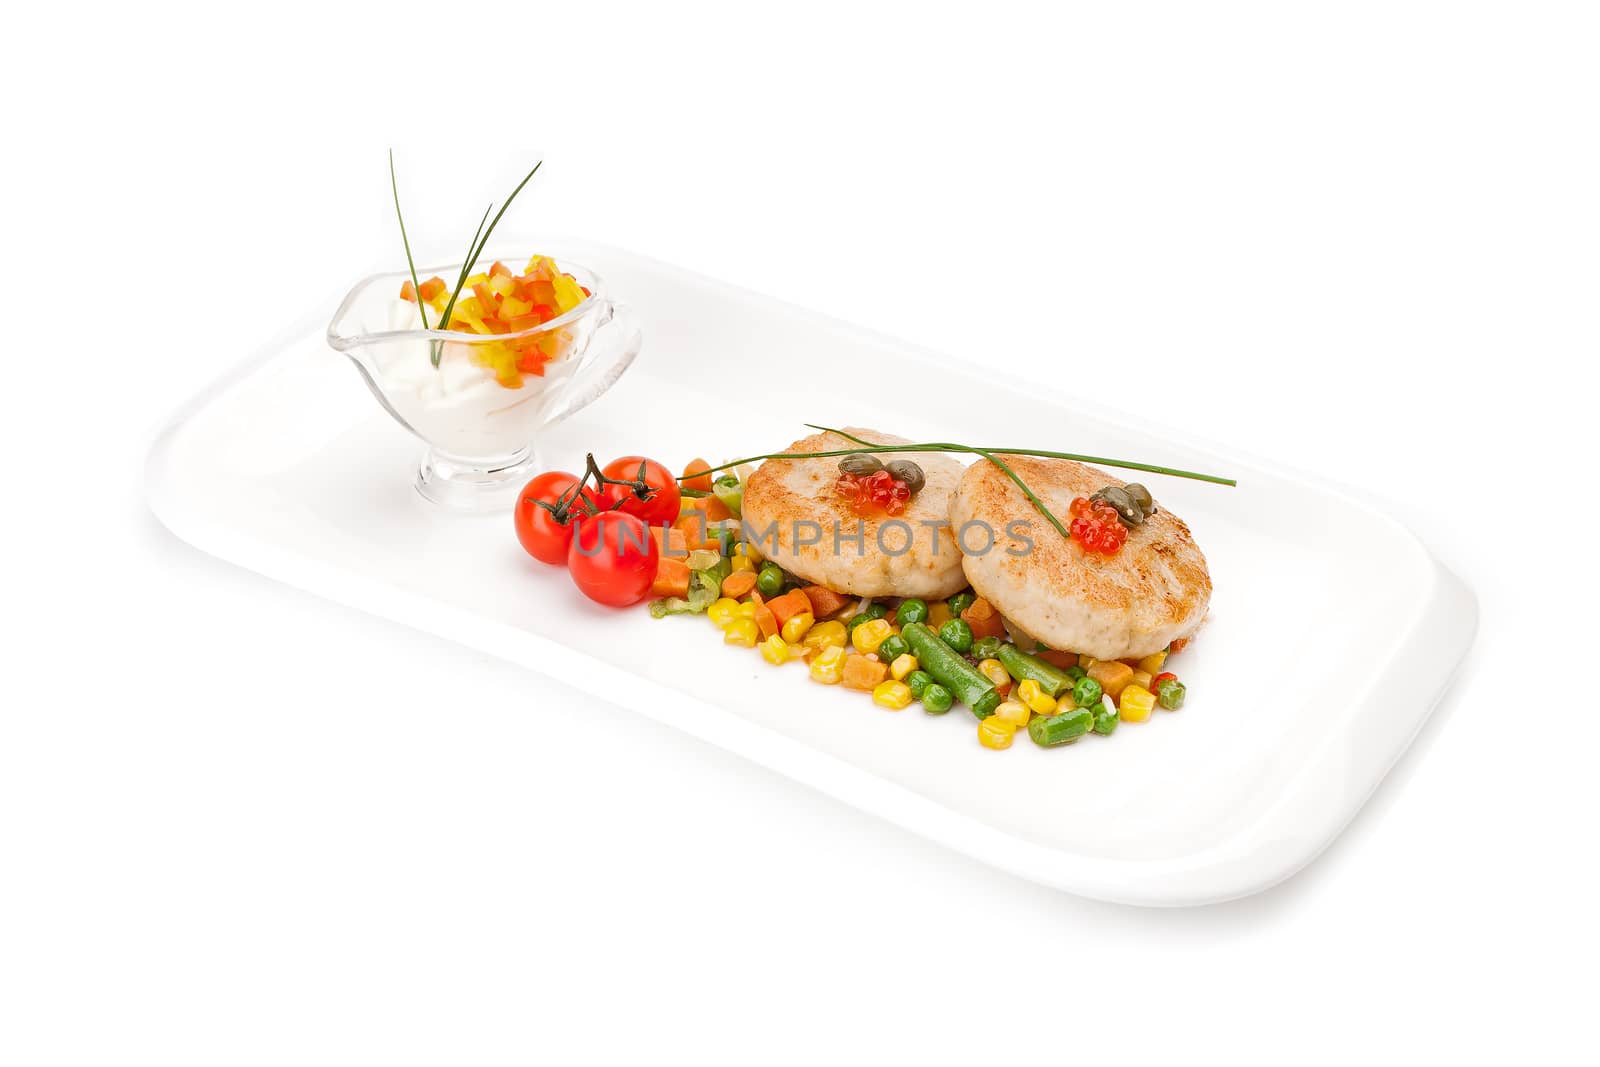 The dietary fish cutlets served on a white dish with a garnish from corn and asparagus haricot, with sauce, decorated by red caviar,  isolated on a white background.